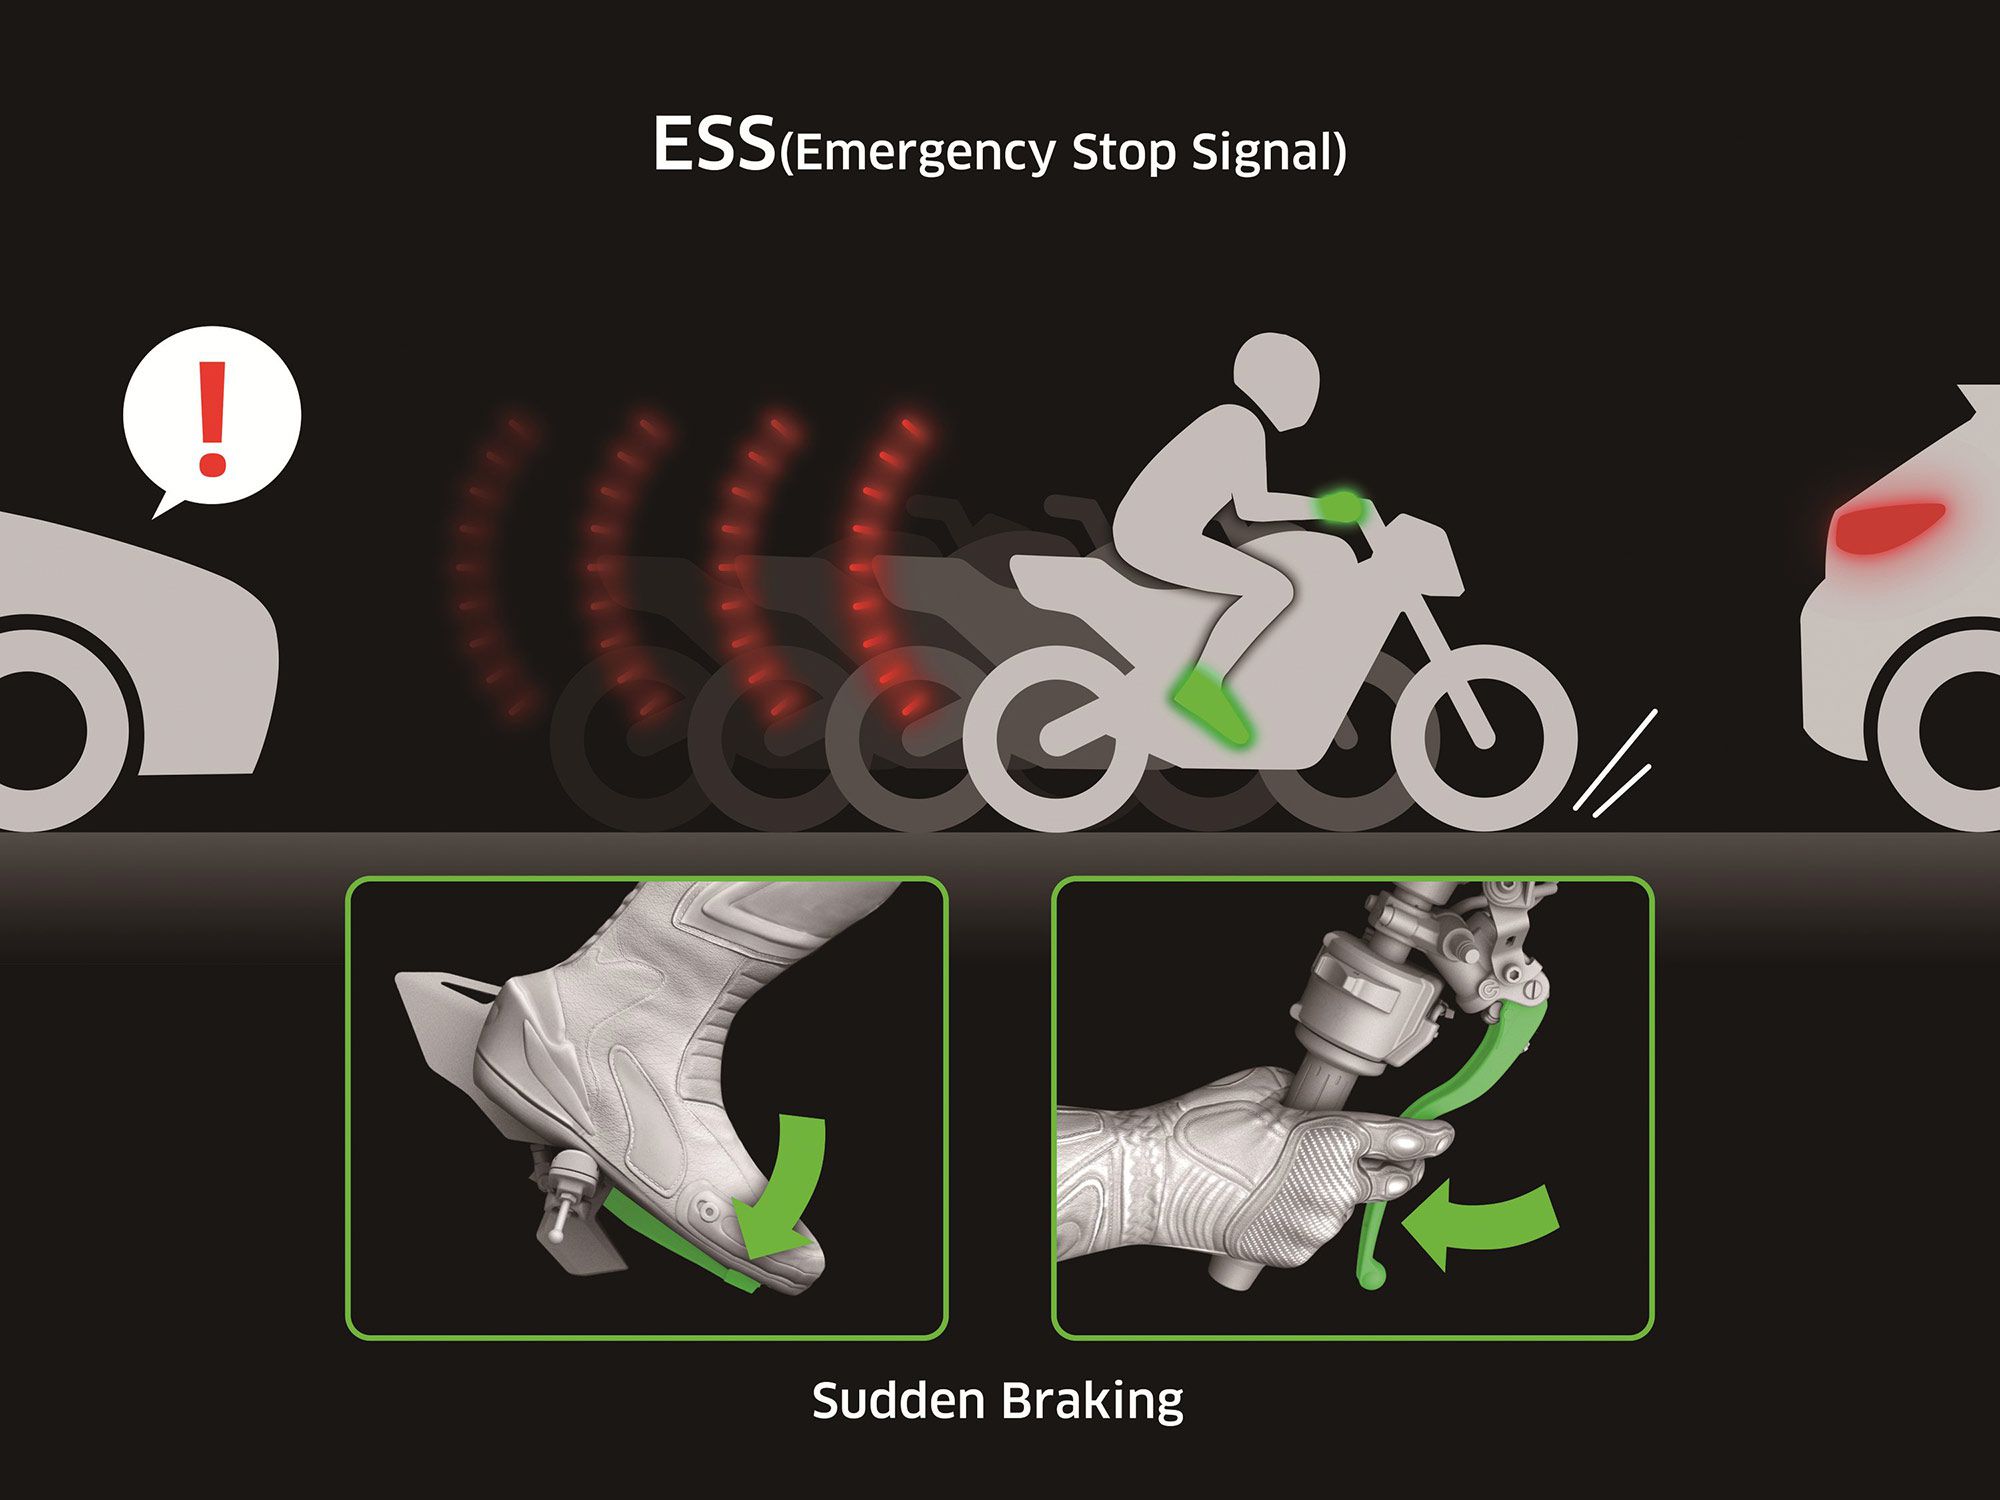 During unexpected braking maneuvers, motorists will be alerted by the ESS system.